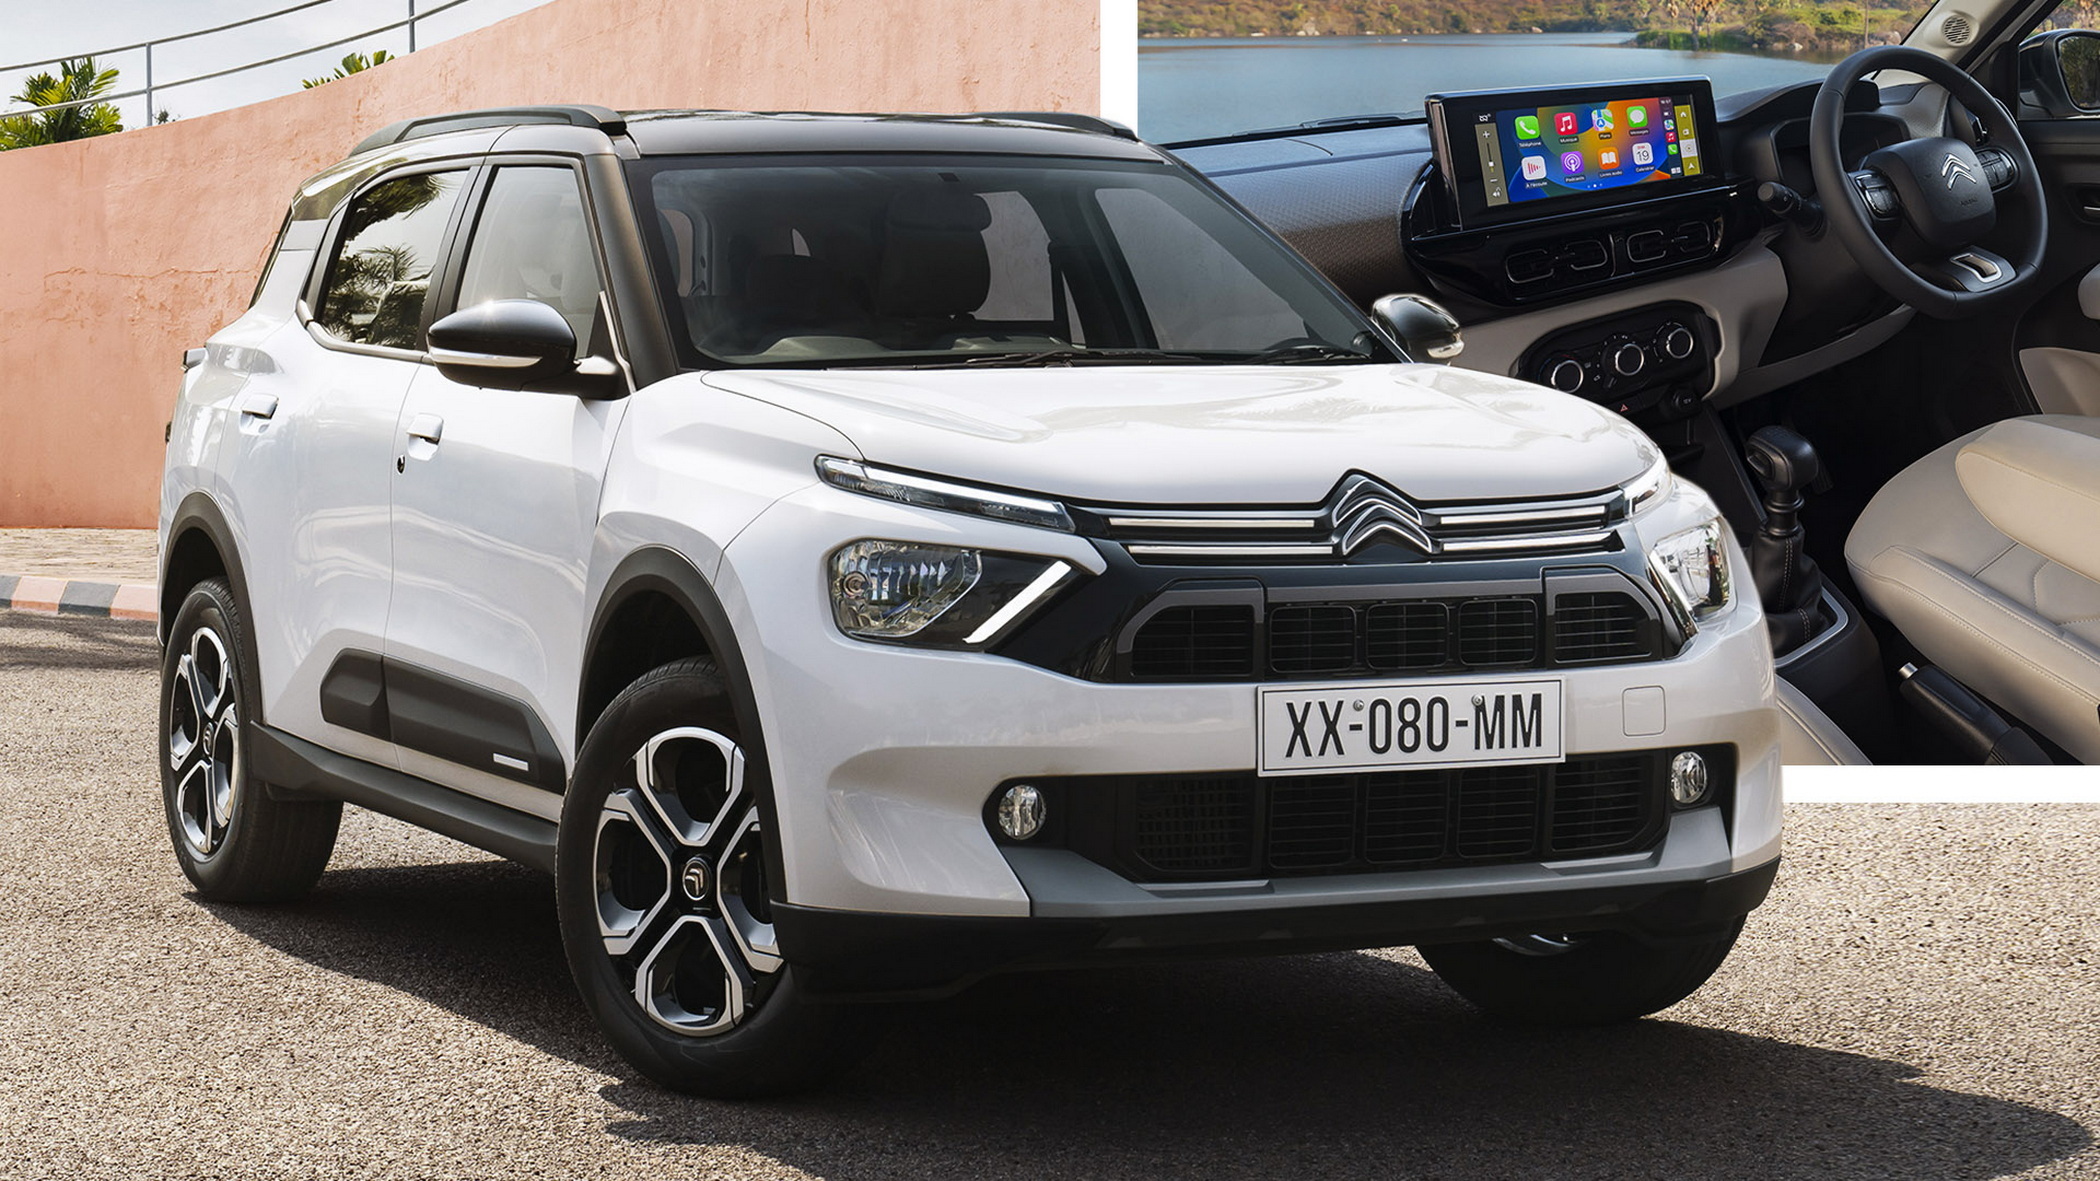 Citroen Launches New C3 Aircross For Emerging Markets With Up To Seven Seats